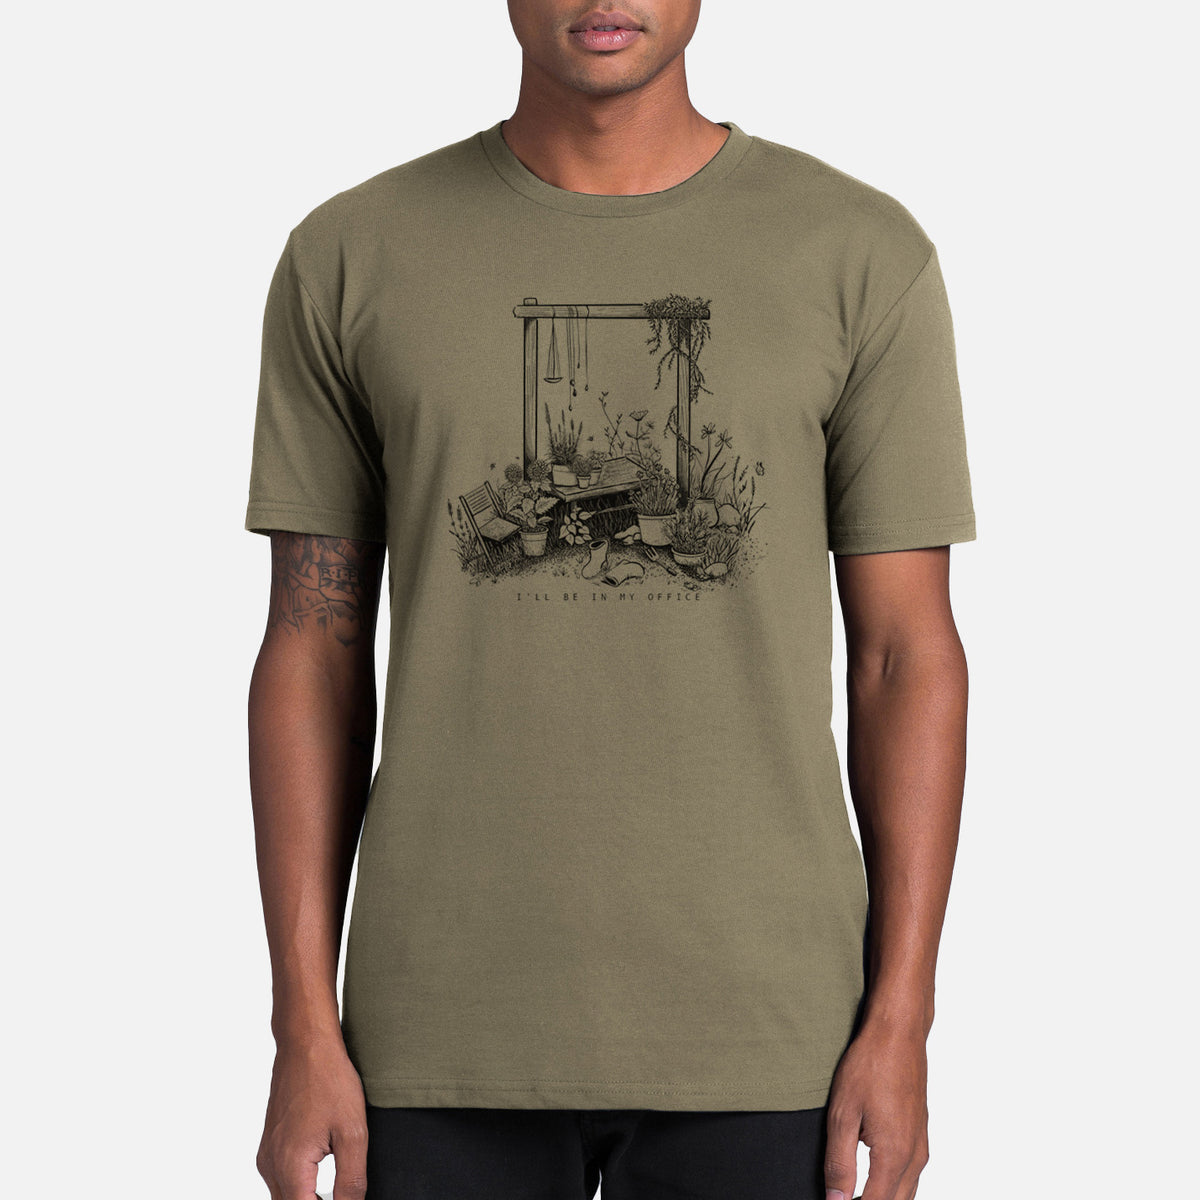 I&#39;ll Be In My Office — Garden - Mens Everyday Staple Tee